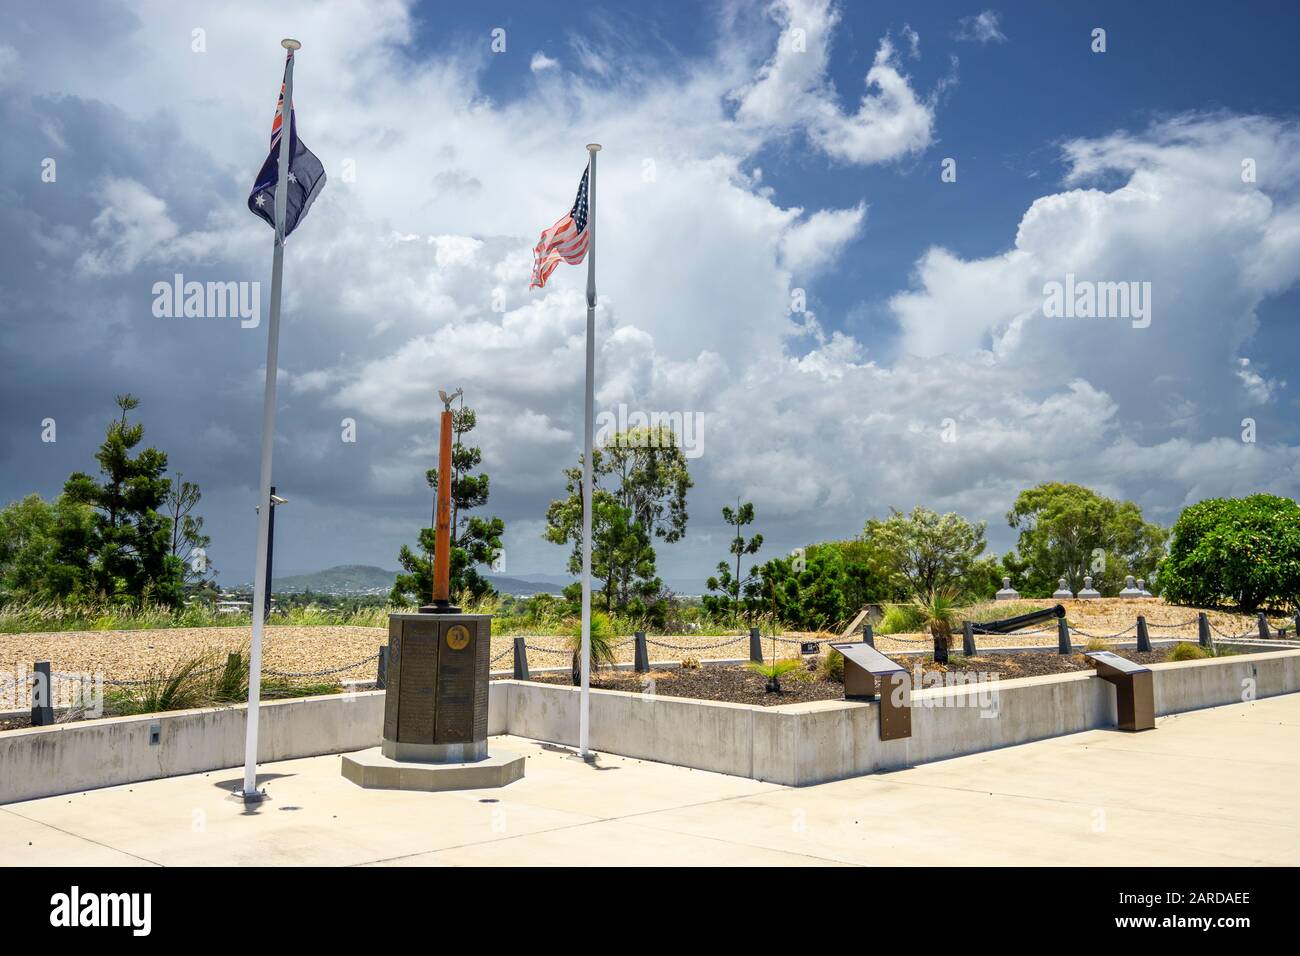 United States 5th Air Force Memorial at Kissing Point Fort, Townsville, Queensland, Australia Stock Photo